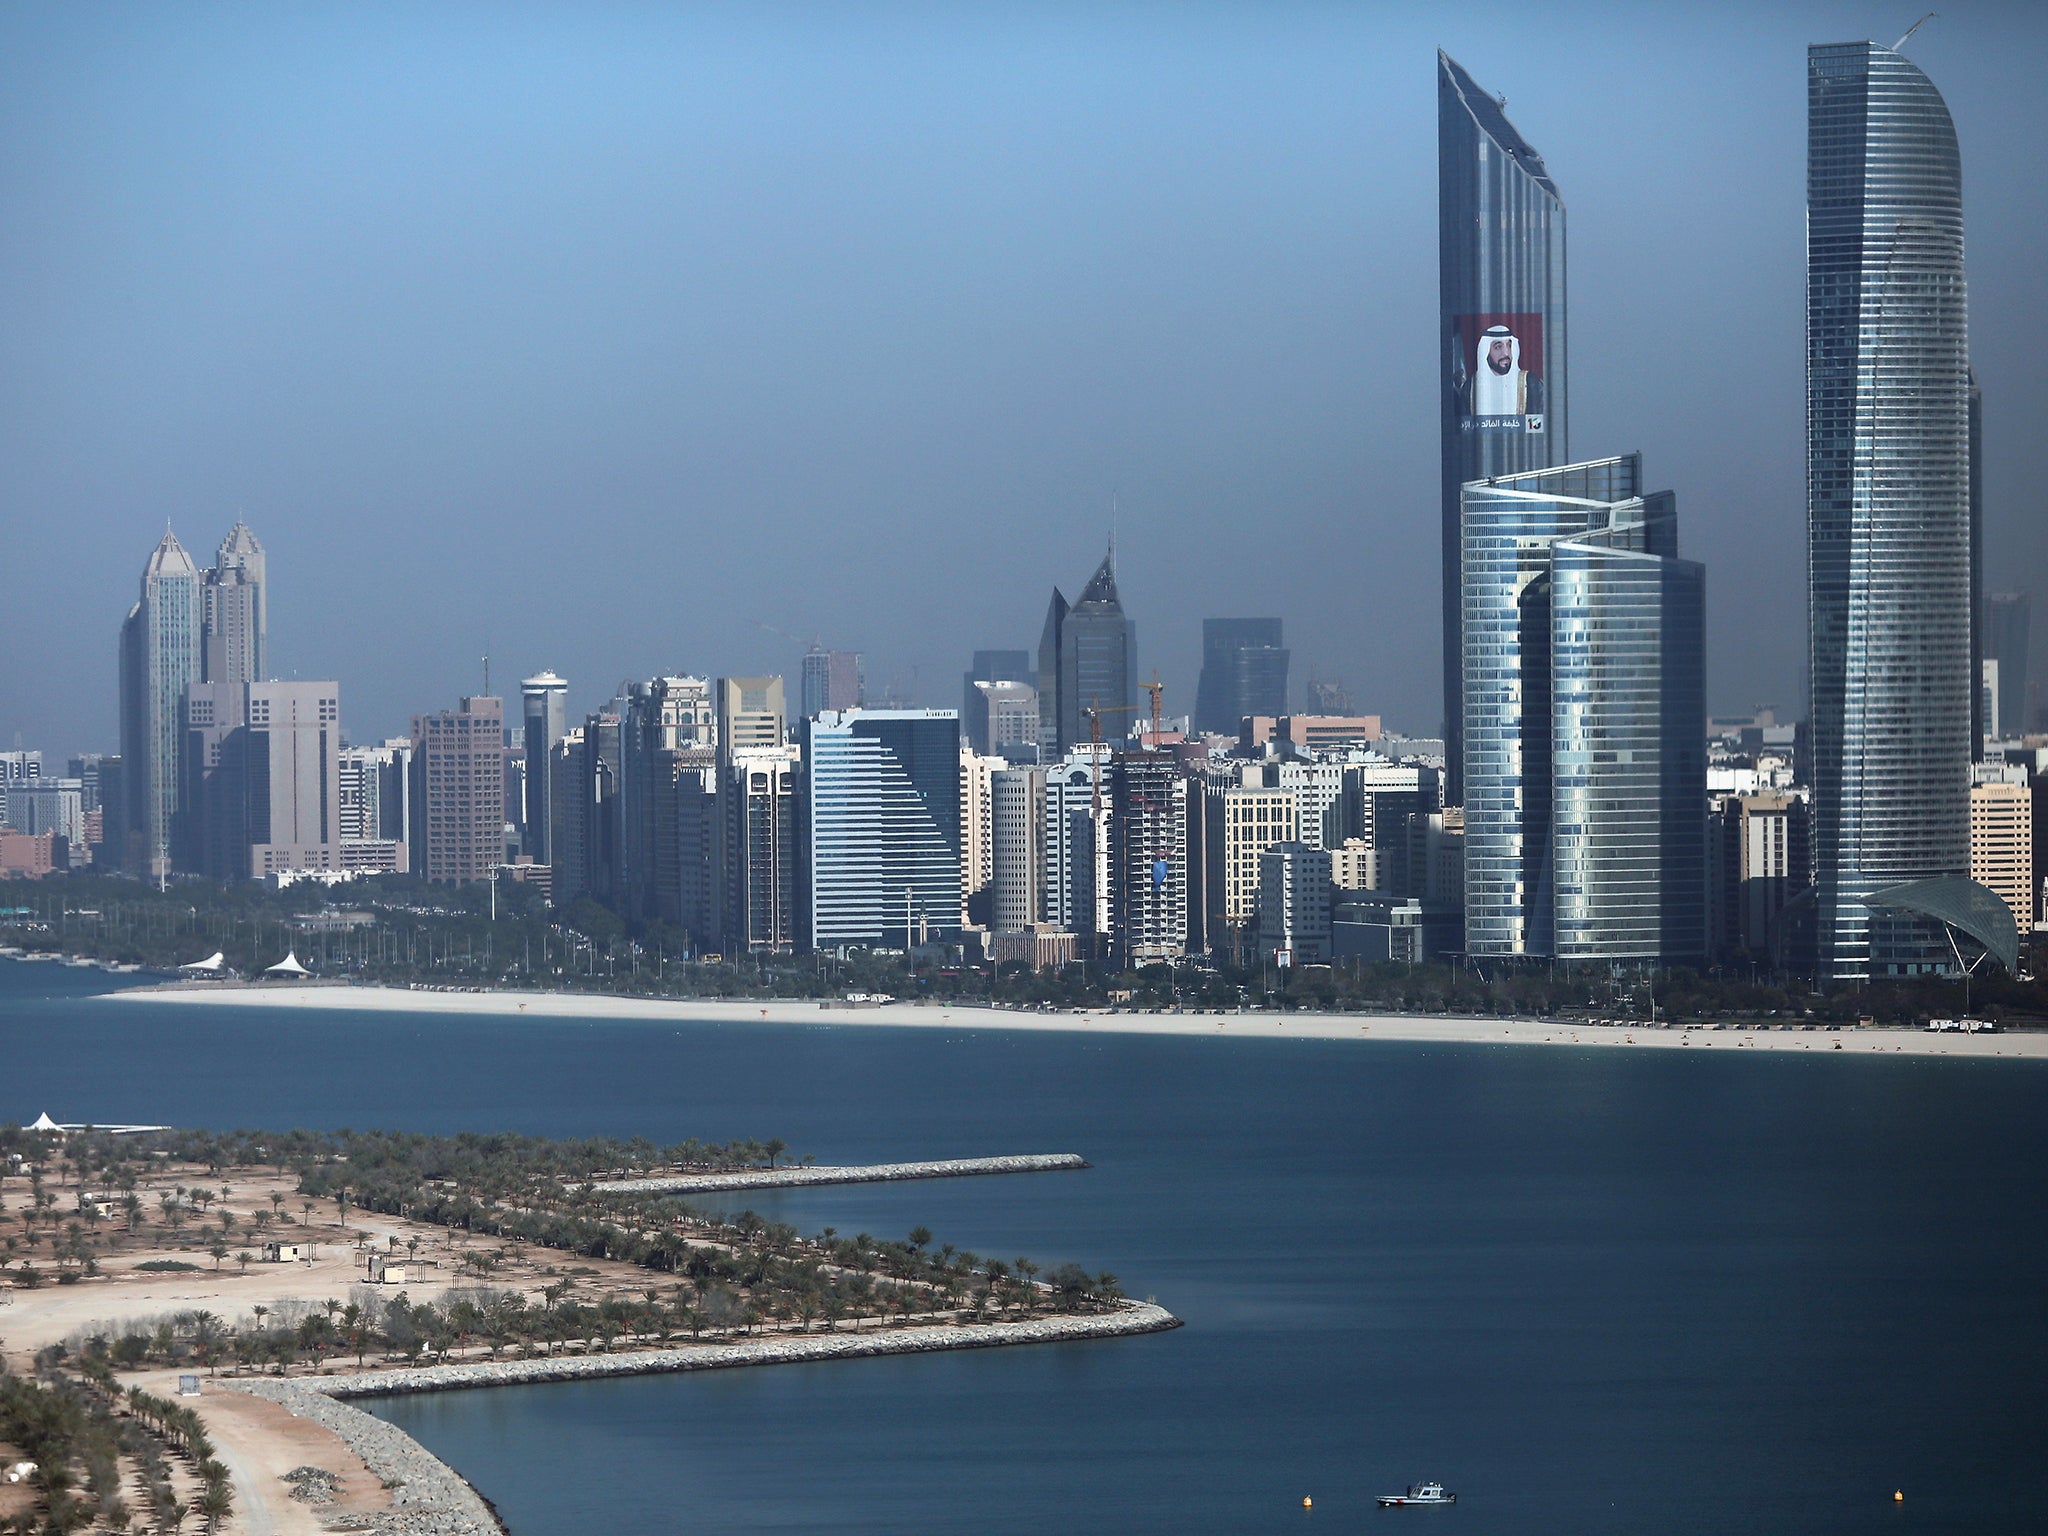 Amid the gleaming towers of Abu Dhabi, it’s difficult to imagine that the Emirates could now break apart